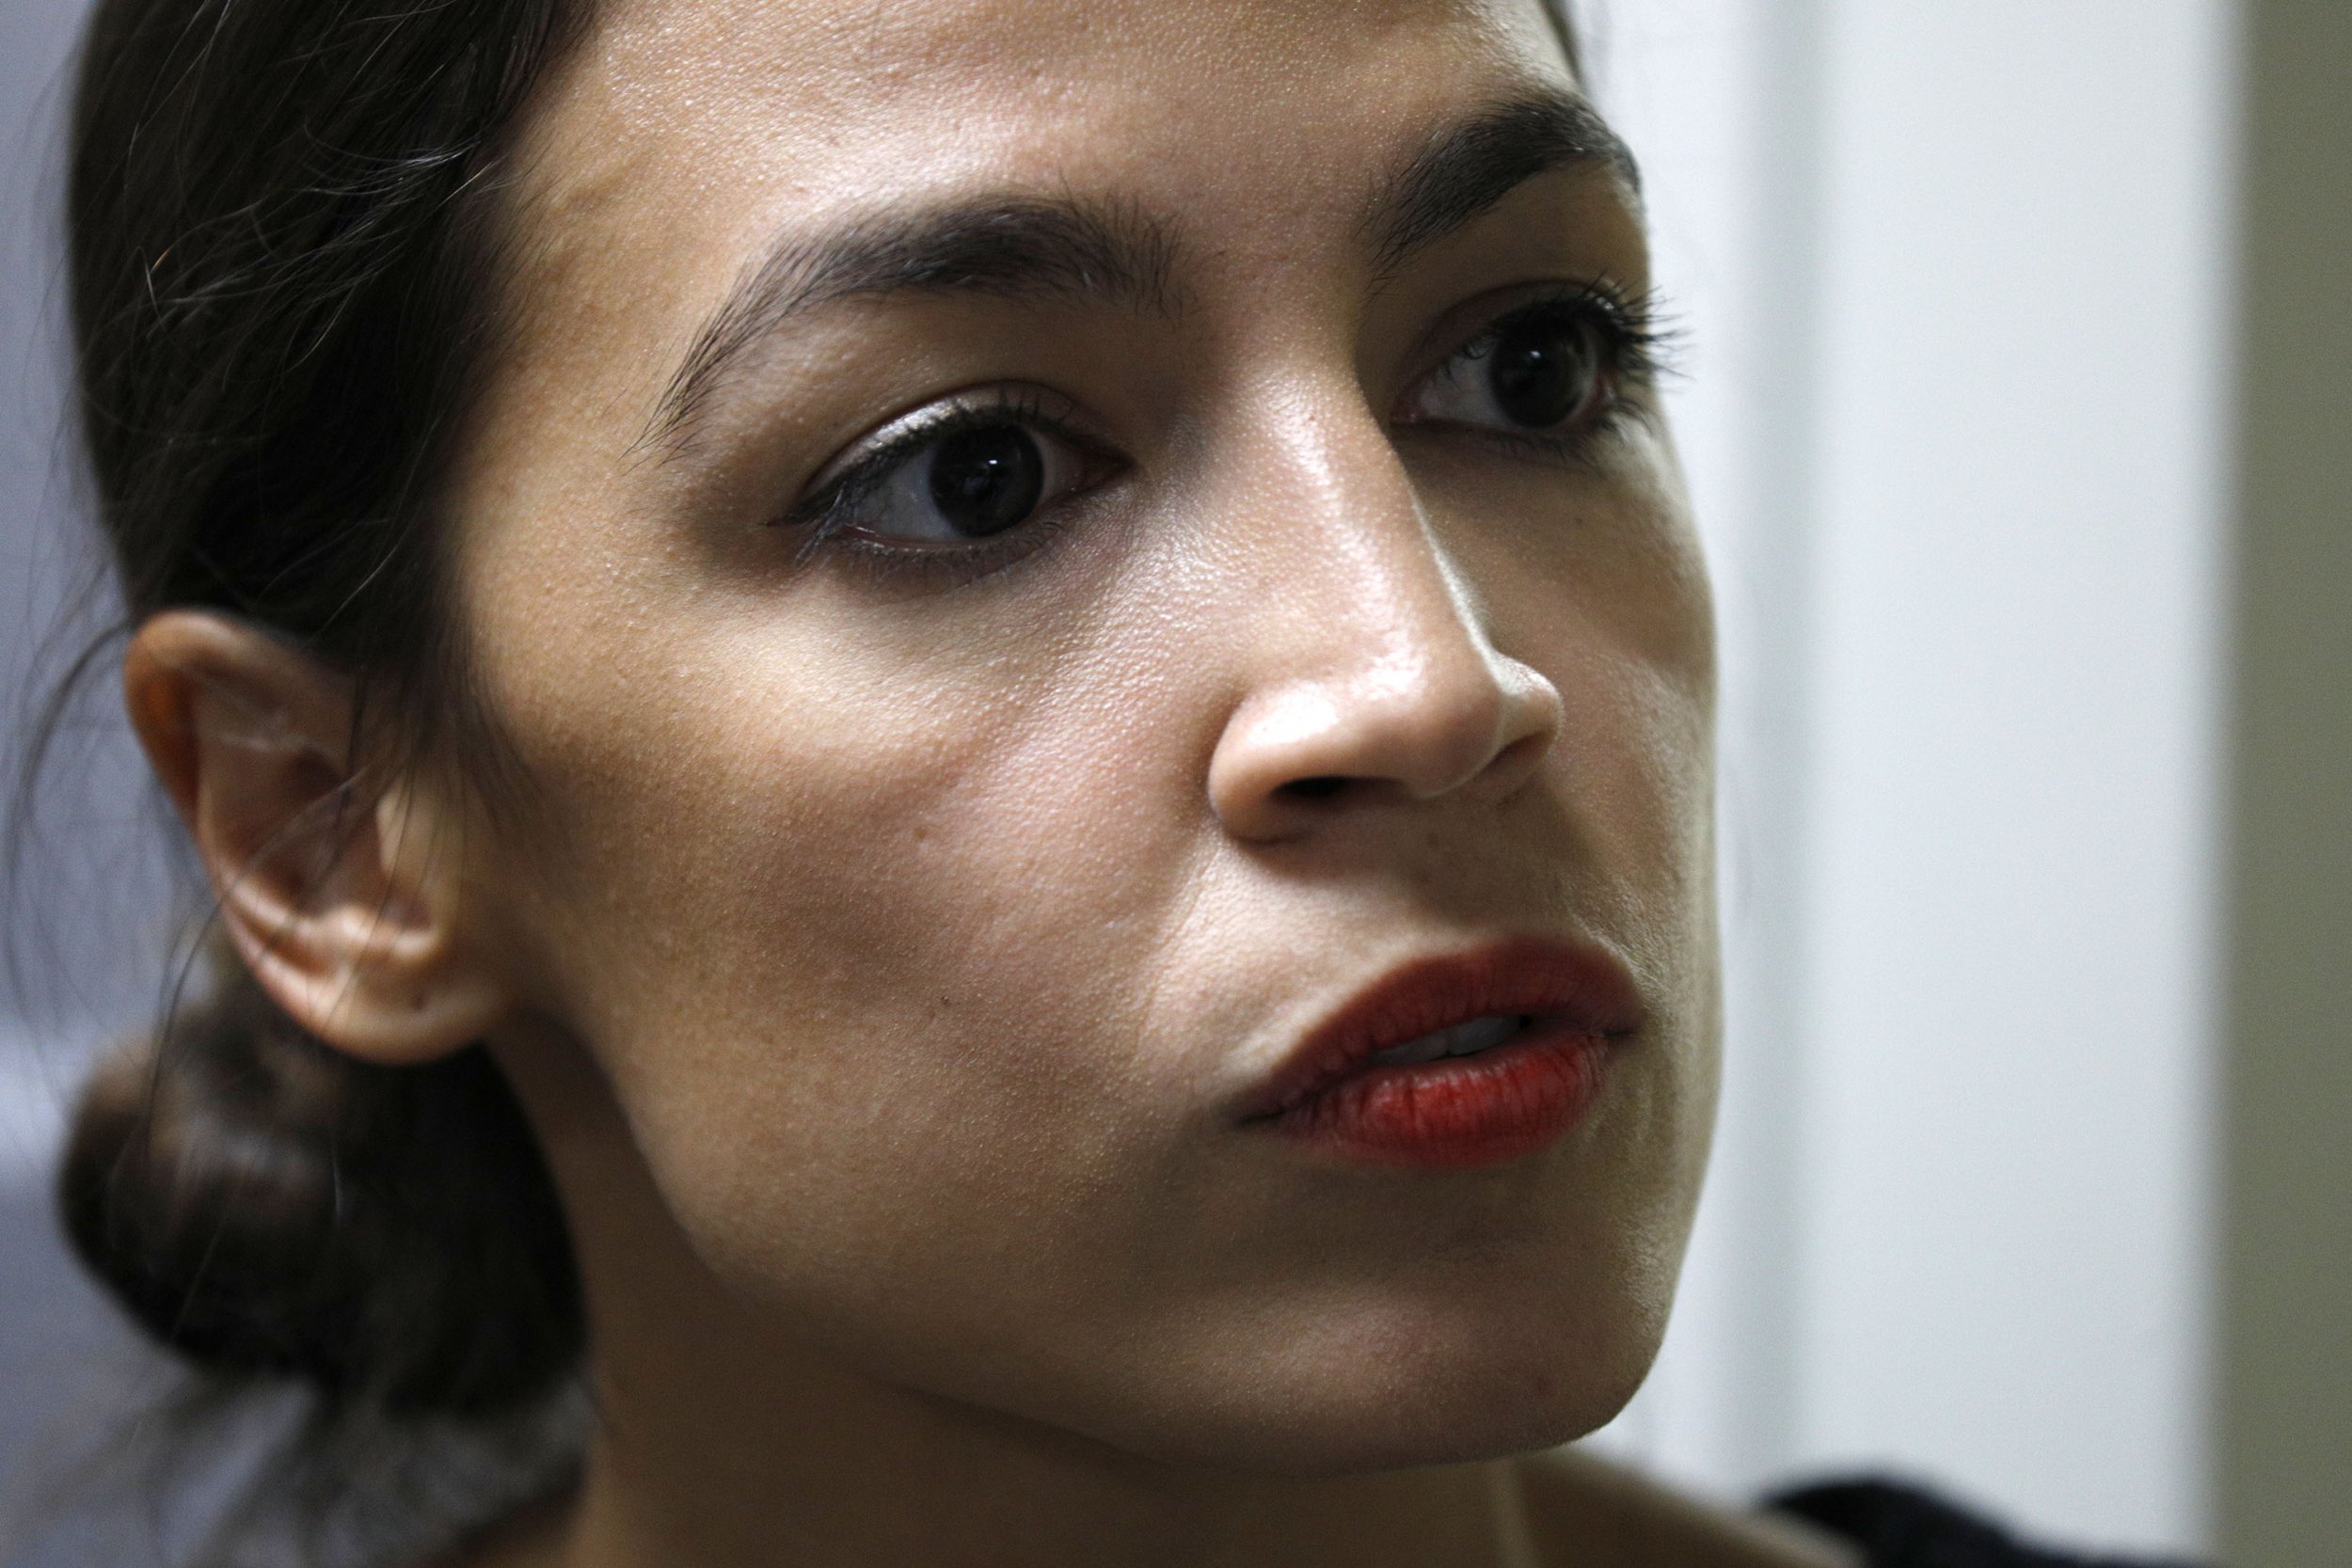 Alexandria Ocasio-Cortez Slams Media Outlet for Lack of Diversity in